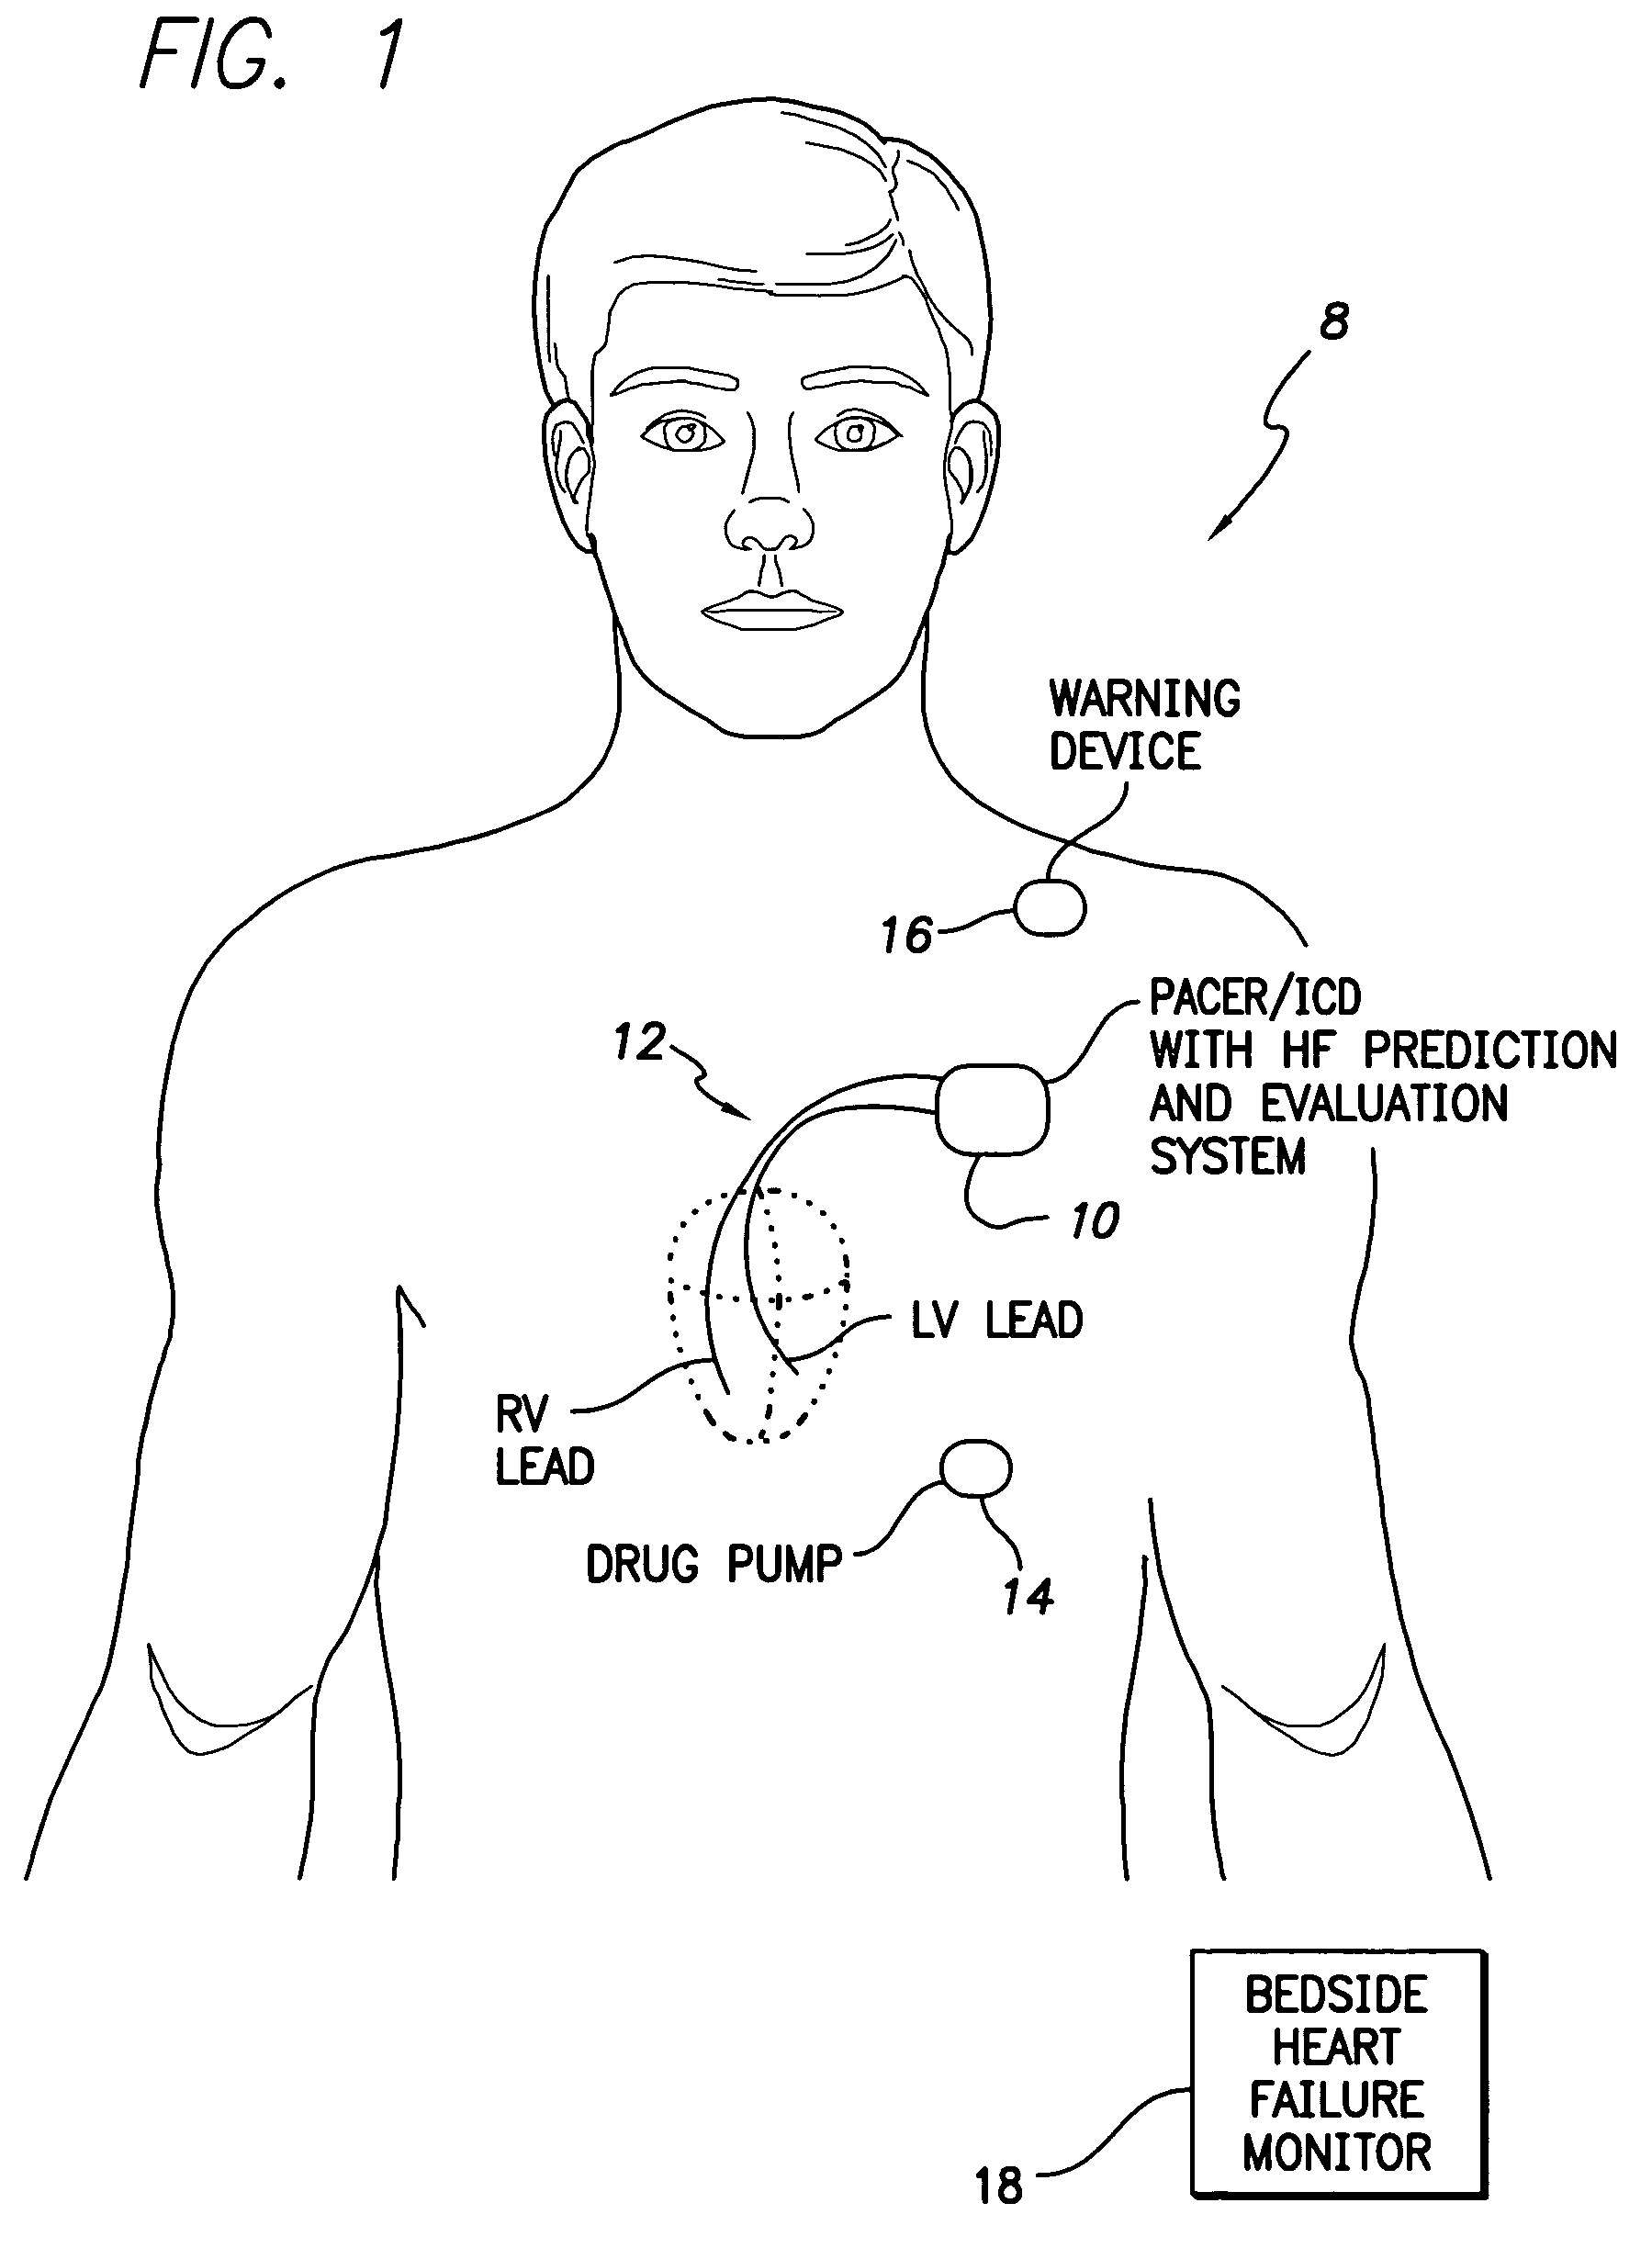 System and method for predicting a heart condition based on impedance values using an implantable medical device